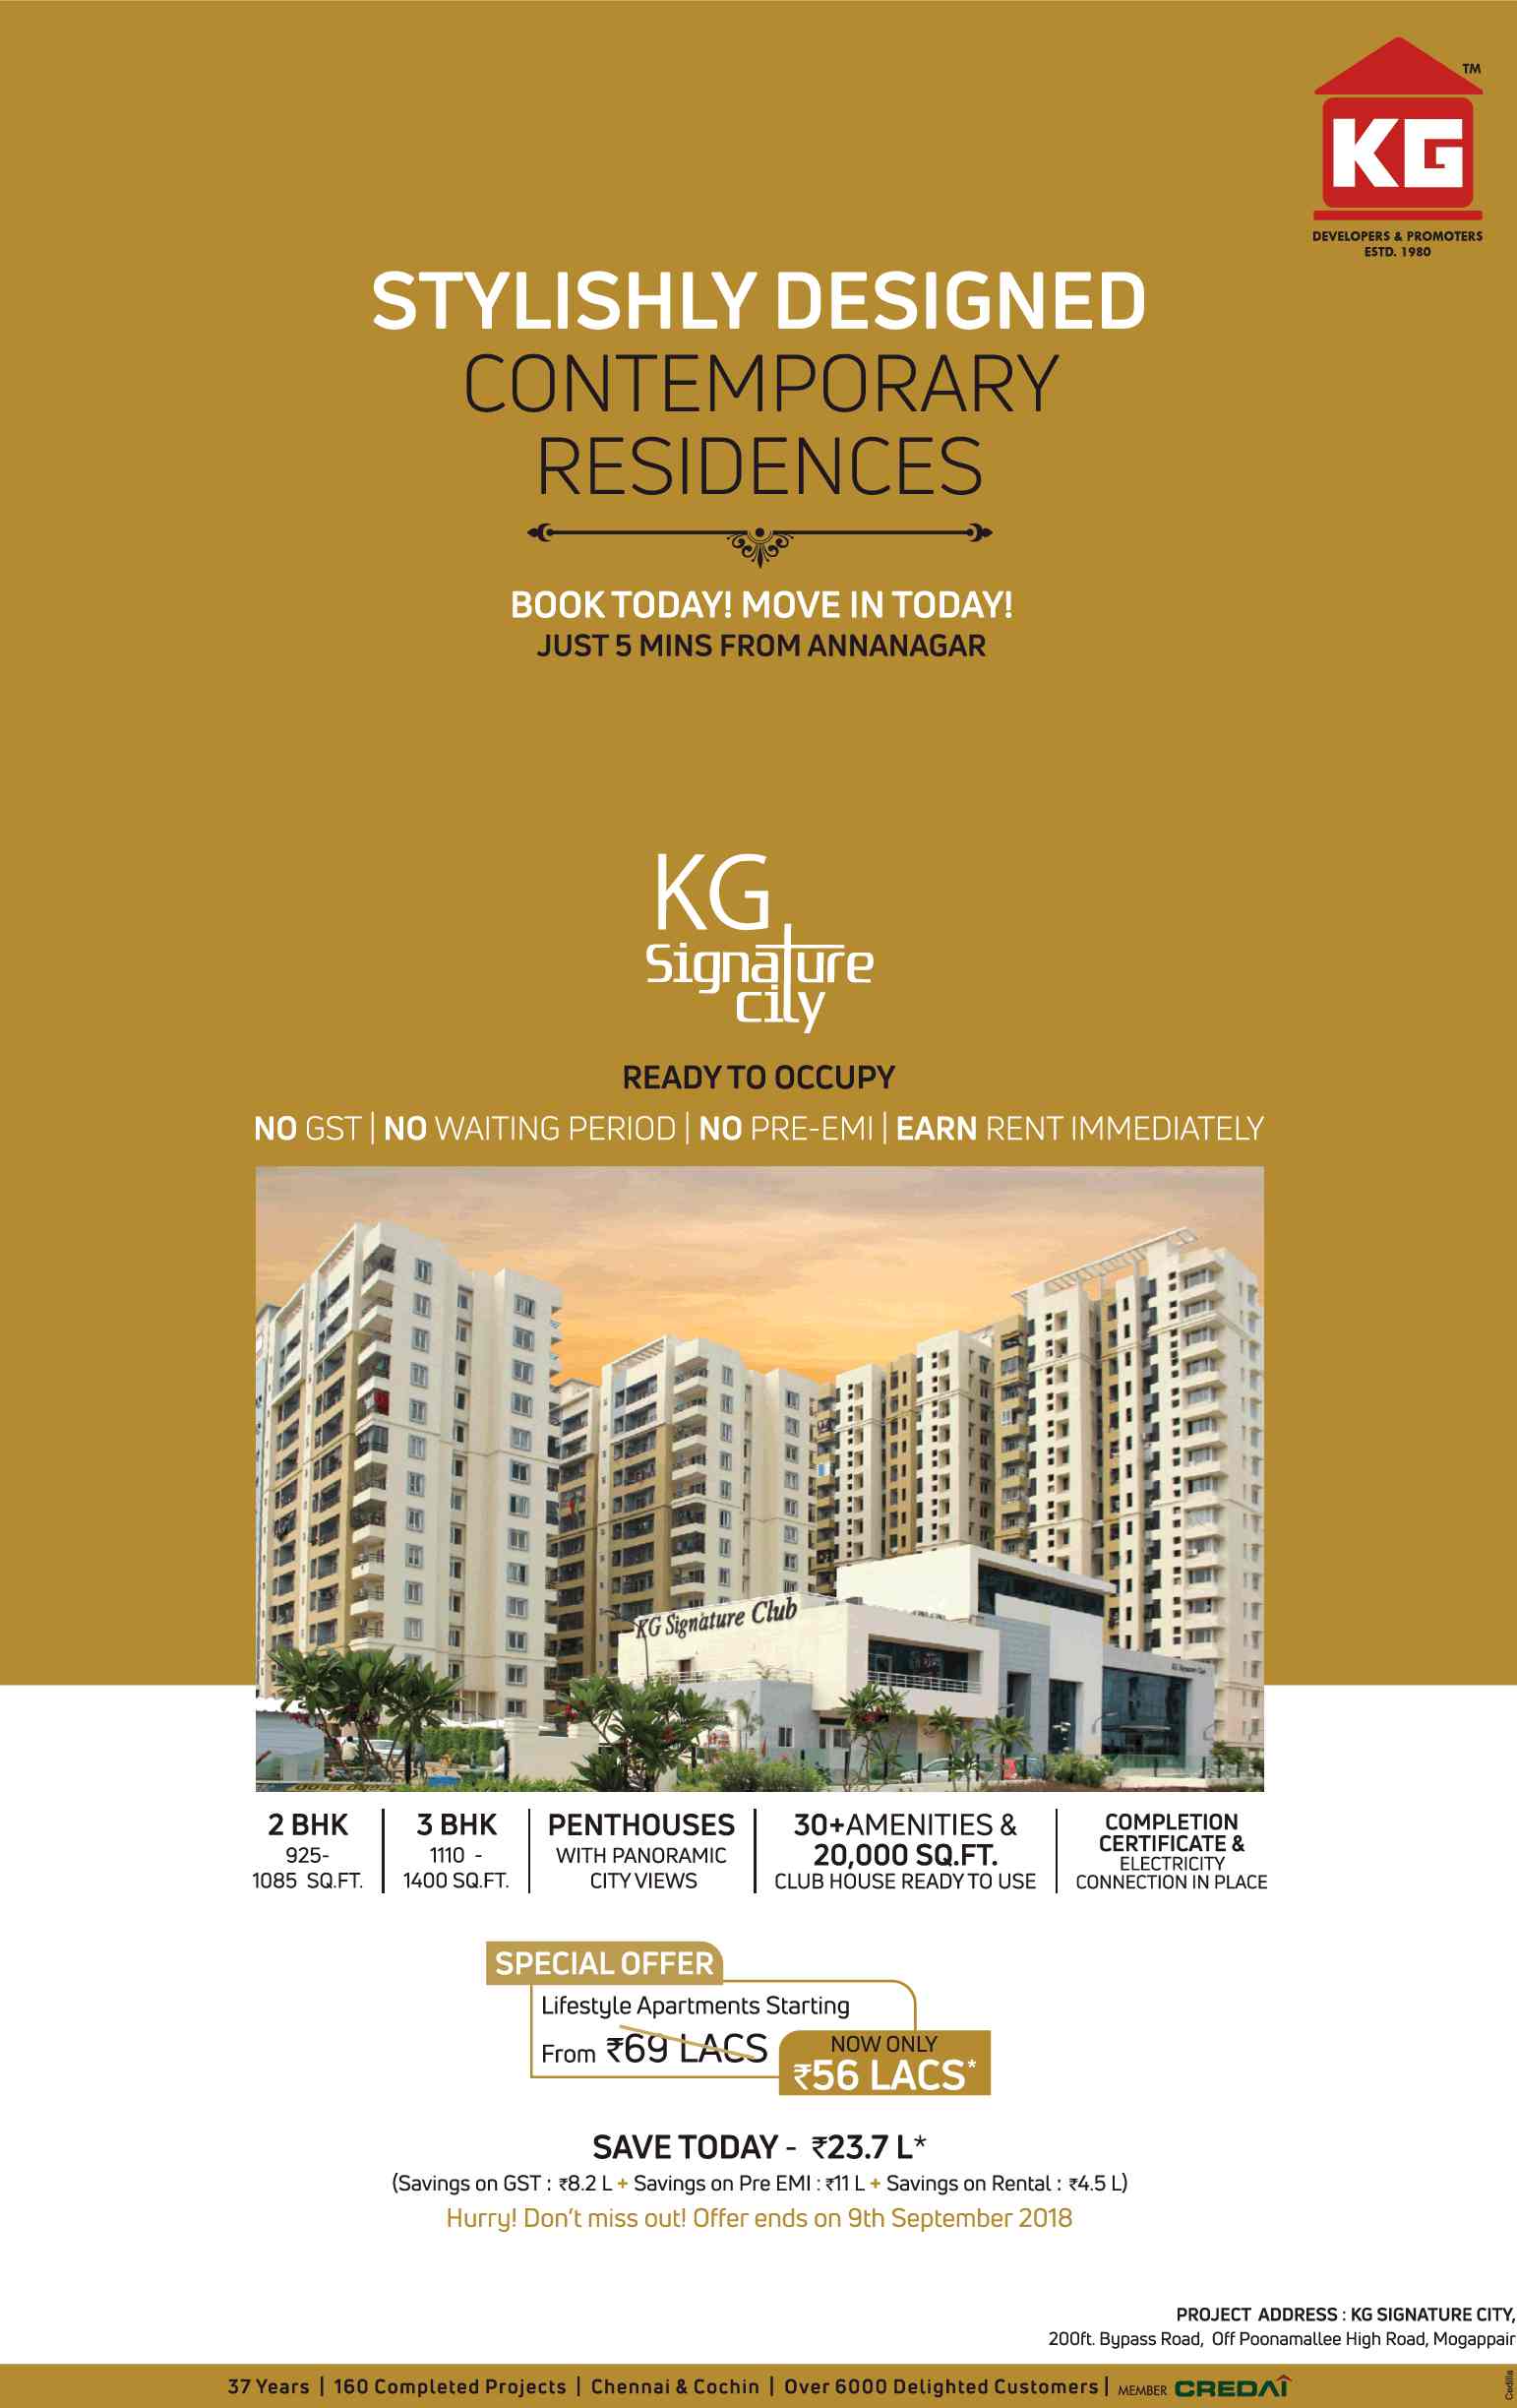 Book ready to occupy homes with no pre-EMI at KG Signature City in Chennai Update